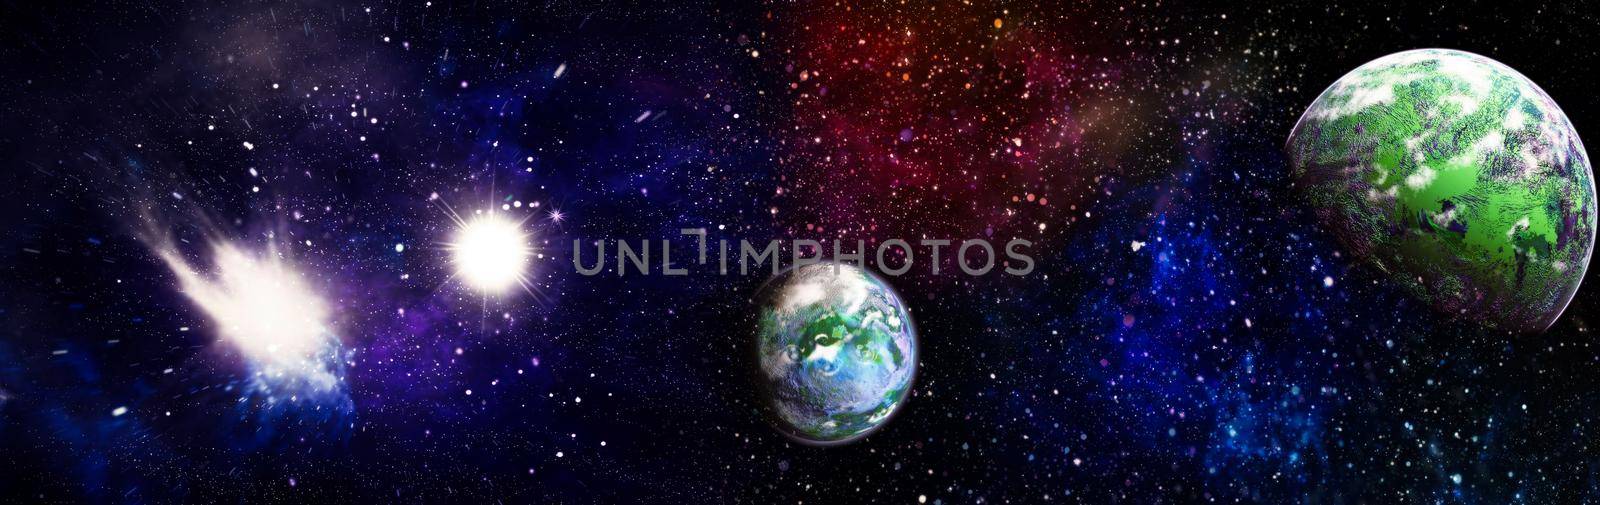 Stars and far galaxies. Wallpaper background. Sci-fi space wallpaper. by Maximusnd